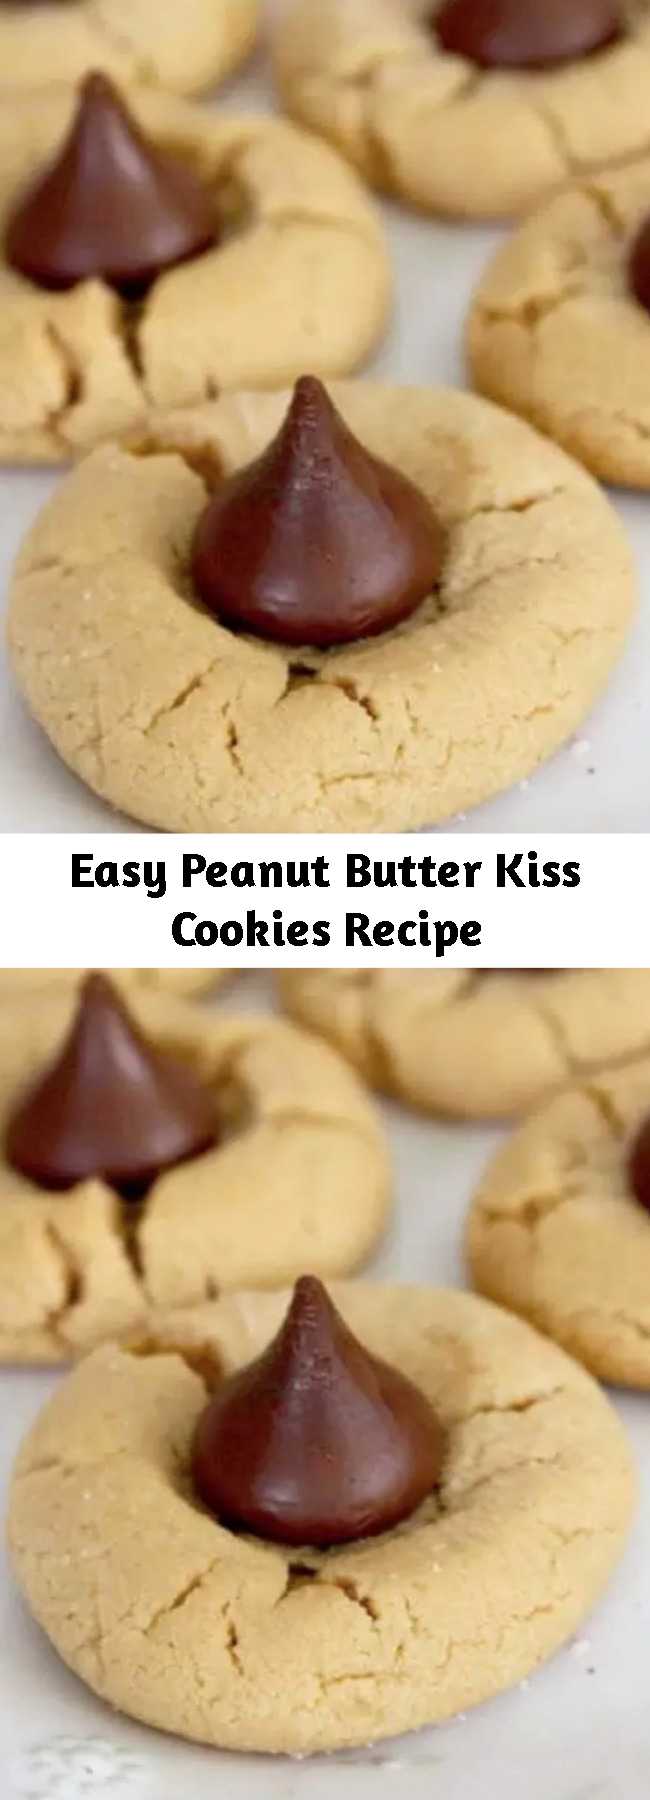 Easy Peanut Butter Kiss Cookies Recipe - This Peanut Butter Kiss Cookies Recipe is easy to make, has basic ingredients and is the perfect peanut butter cookie recipe for the holidays. You’ll be surprised by how easy these are to make and everyone will love them!